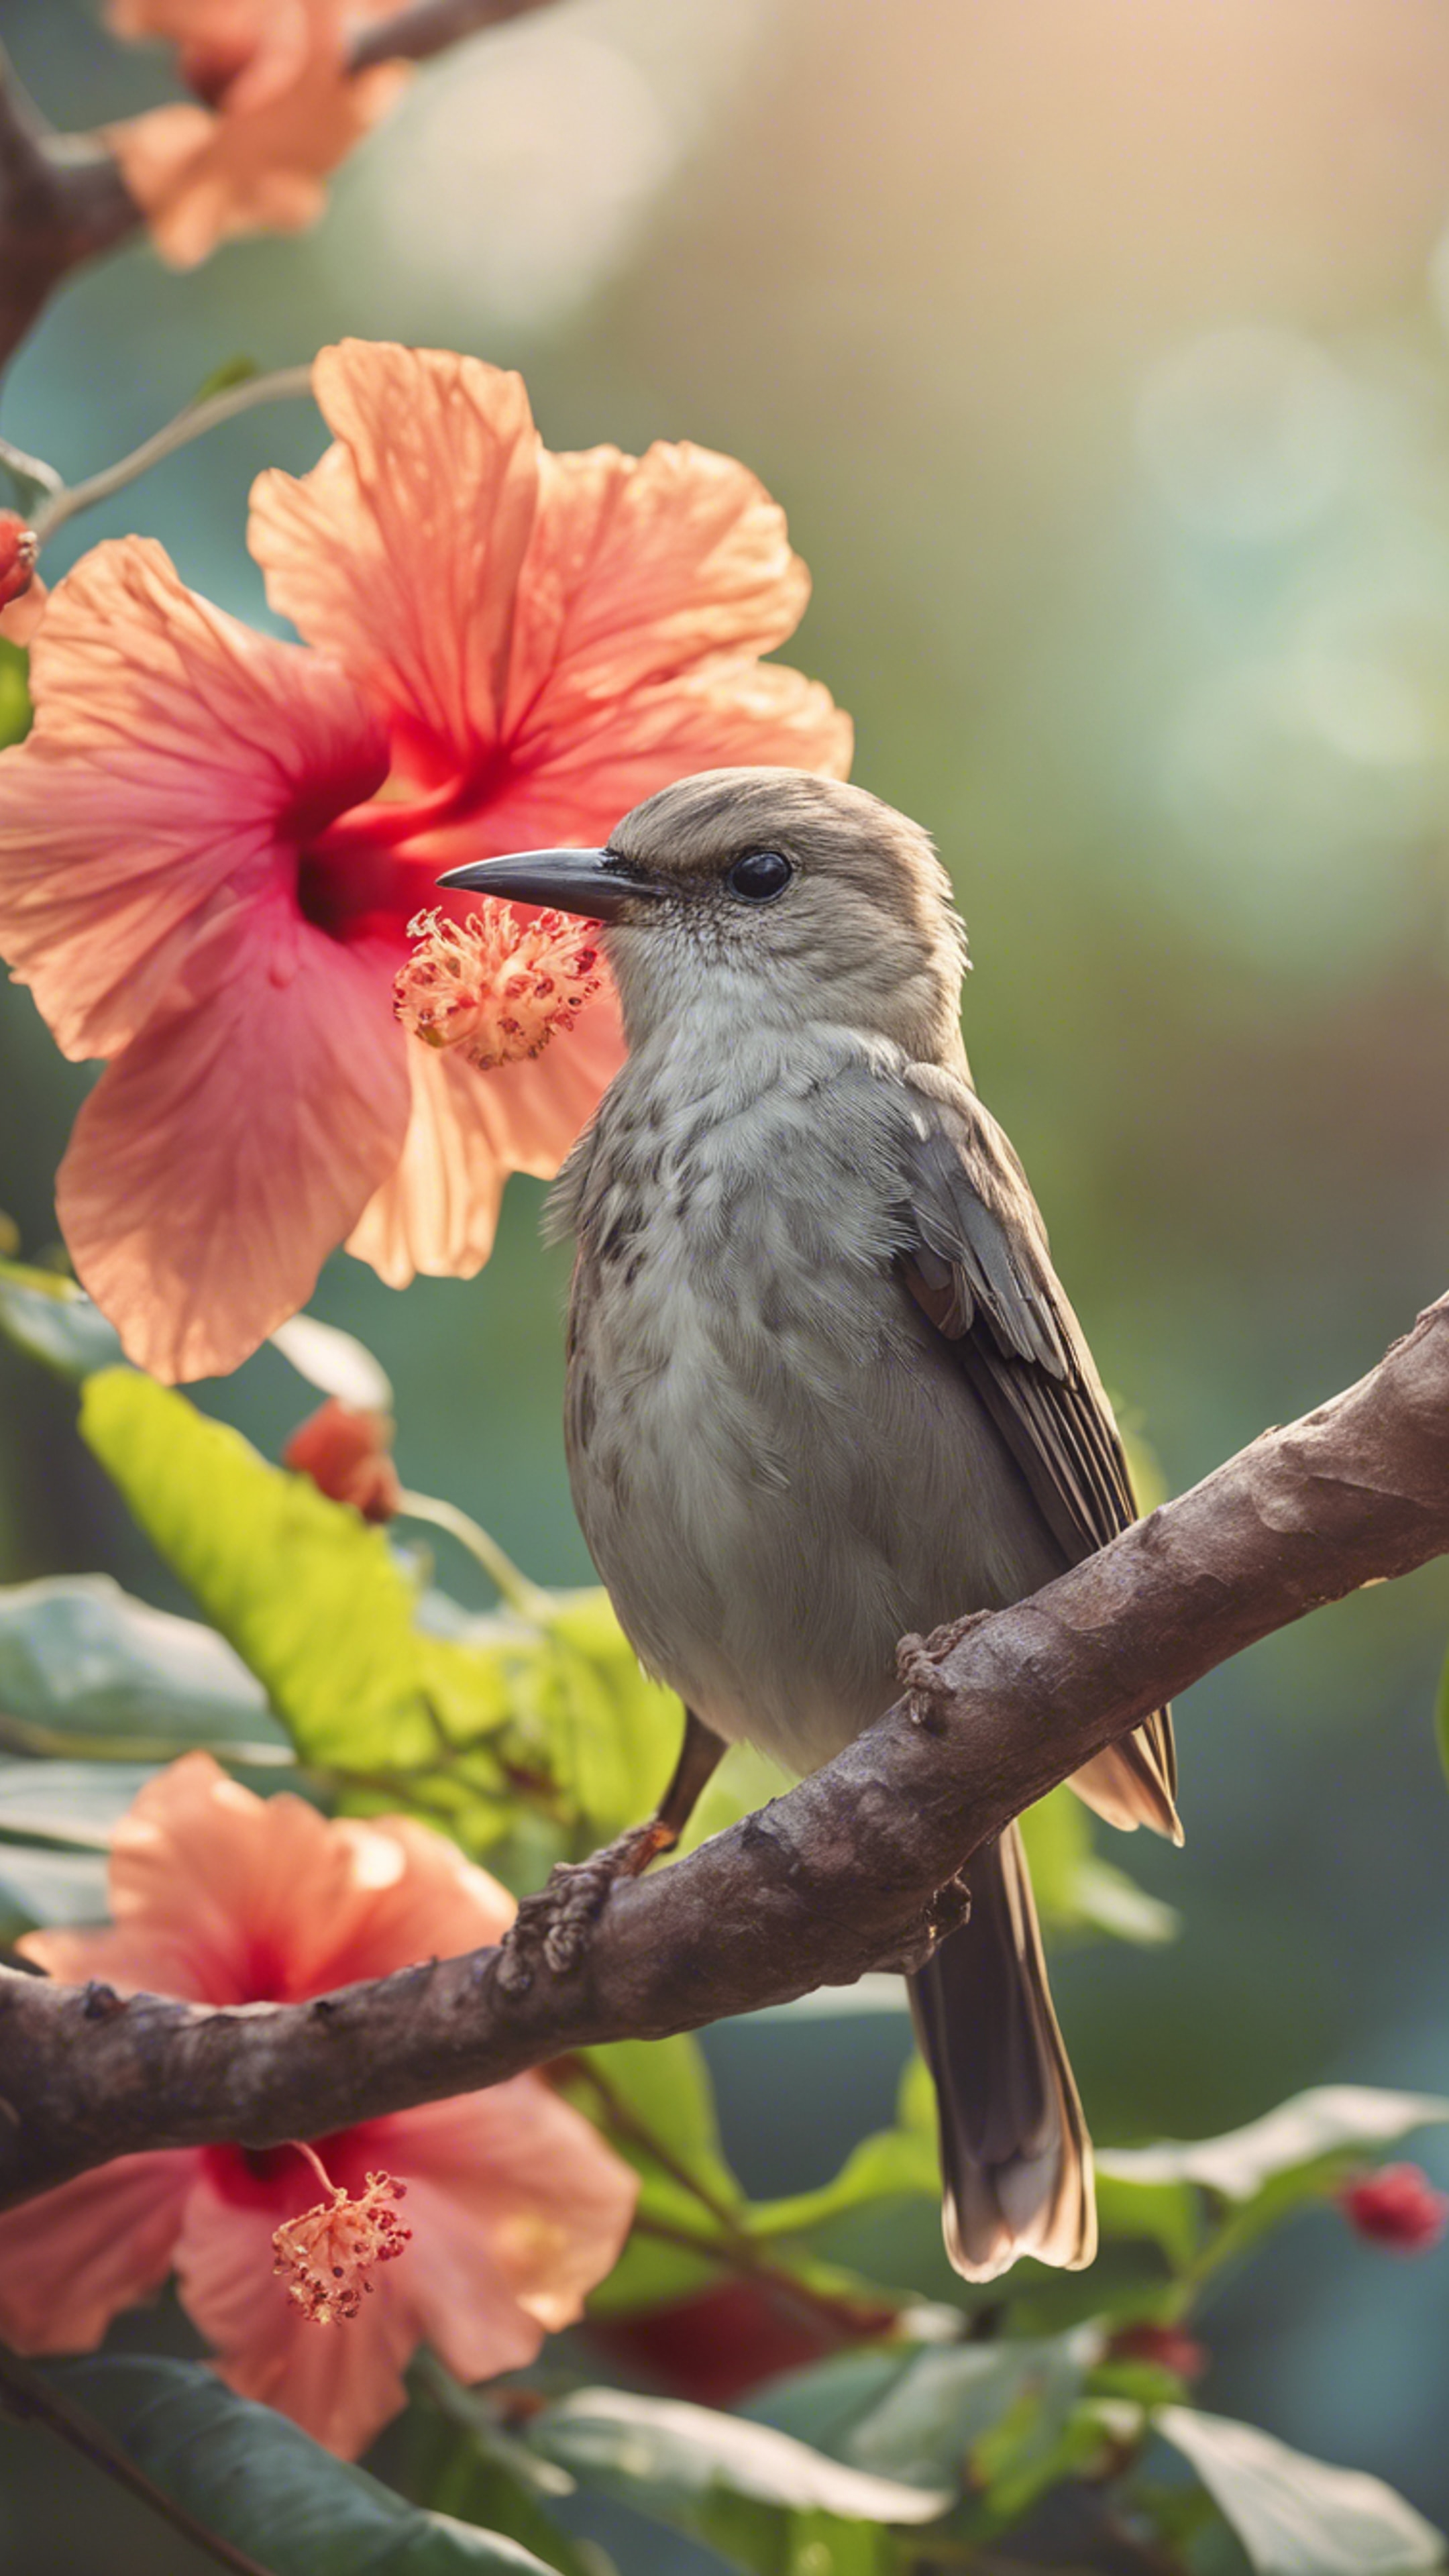 A songbird perched on a branch of a tree adorned with tropical hibiscus blossoms.壁紙[d857d98d1bc842ecae7c]